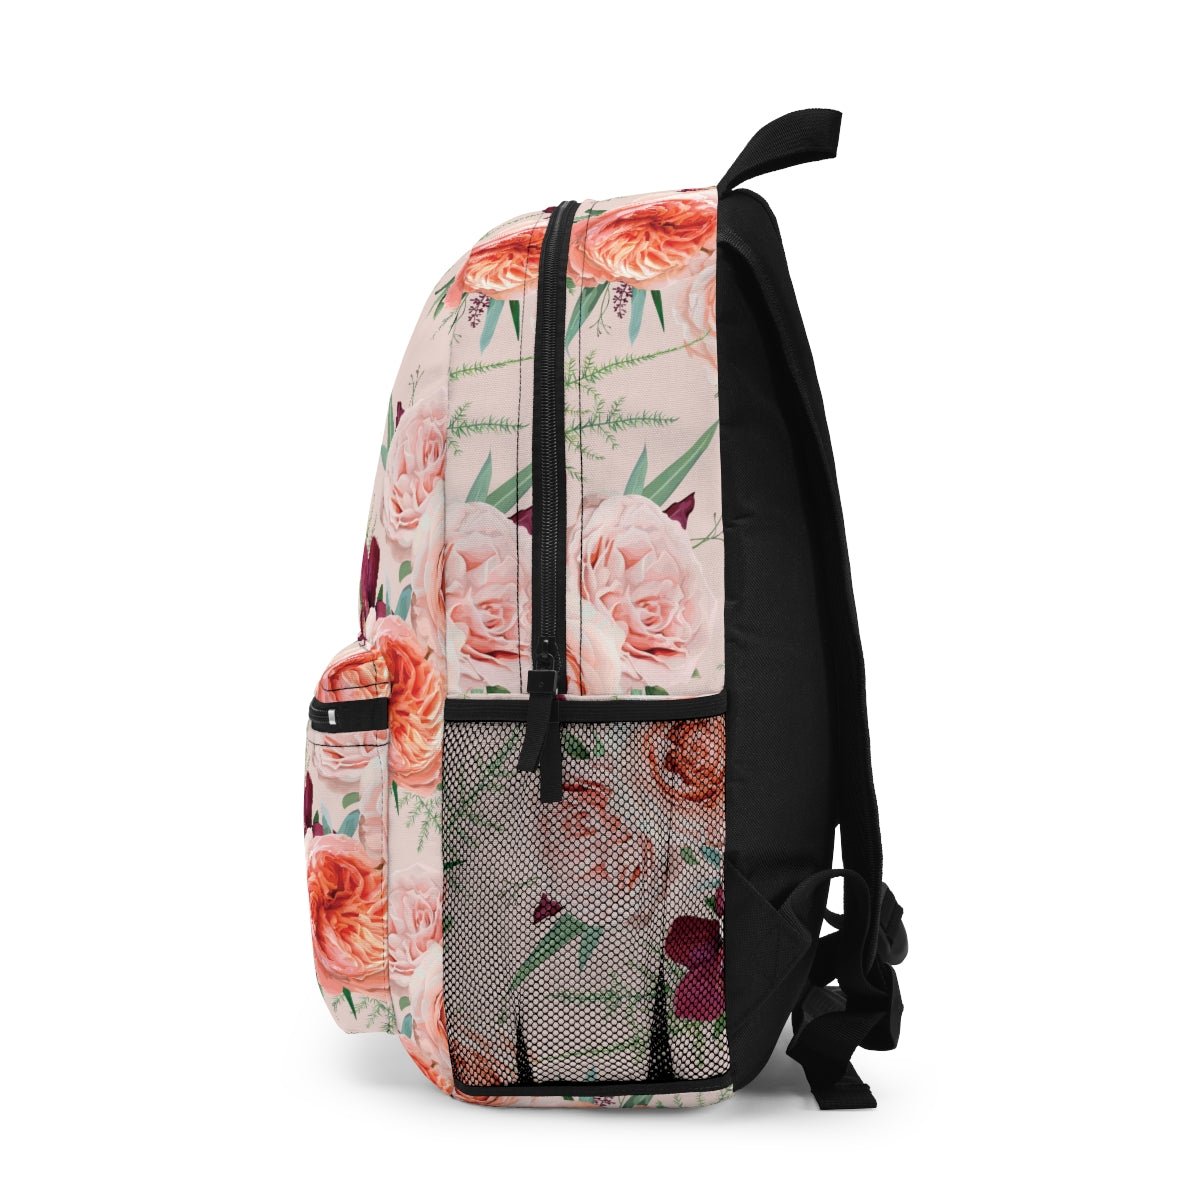 Blush Roses Backpack - Puffin Lime